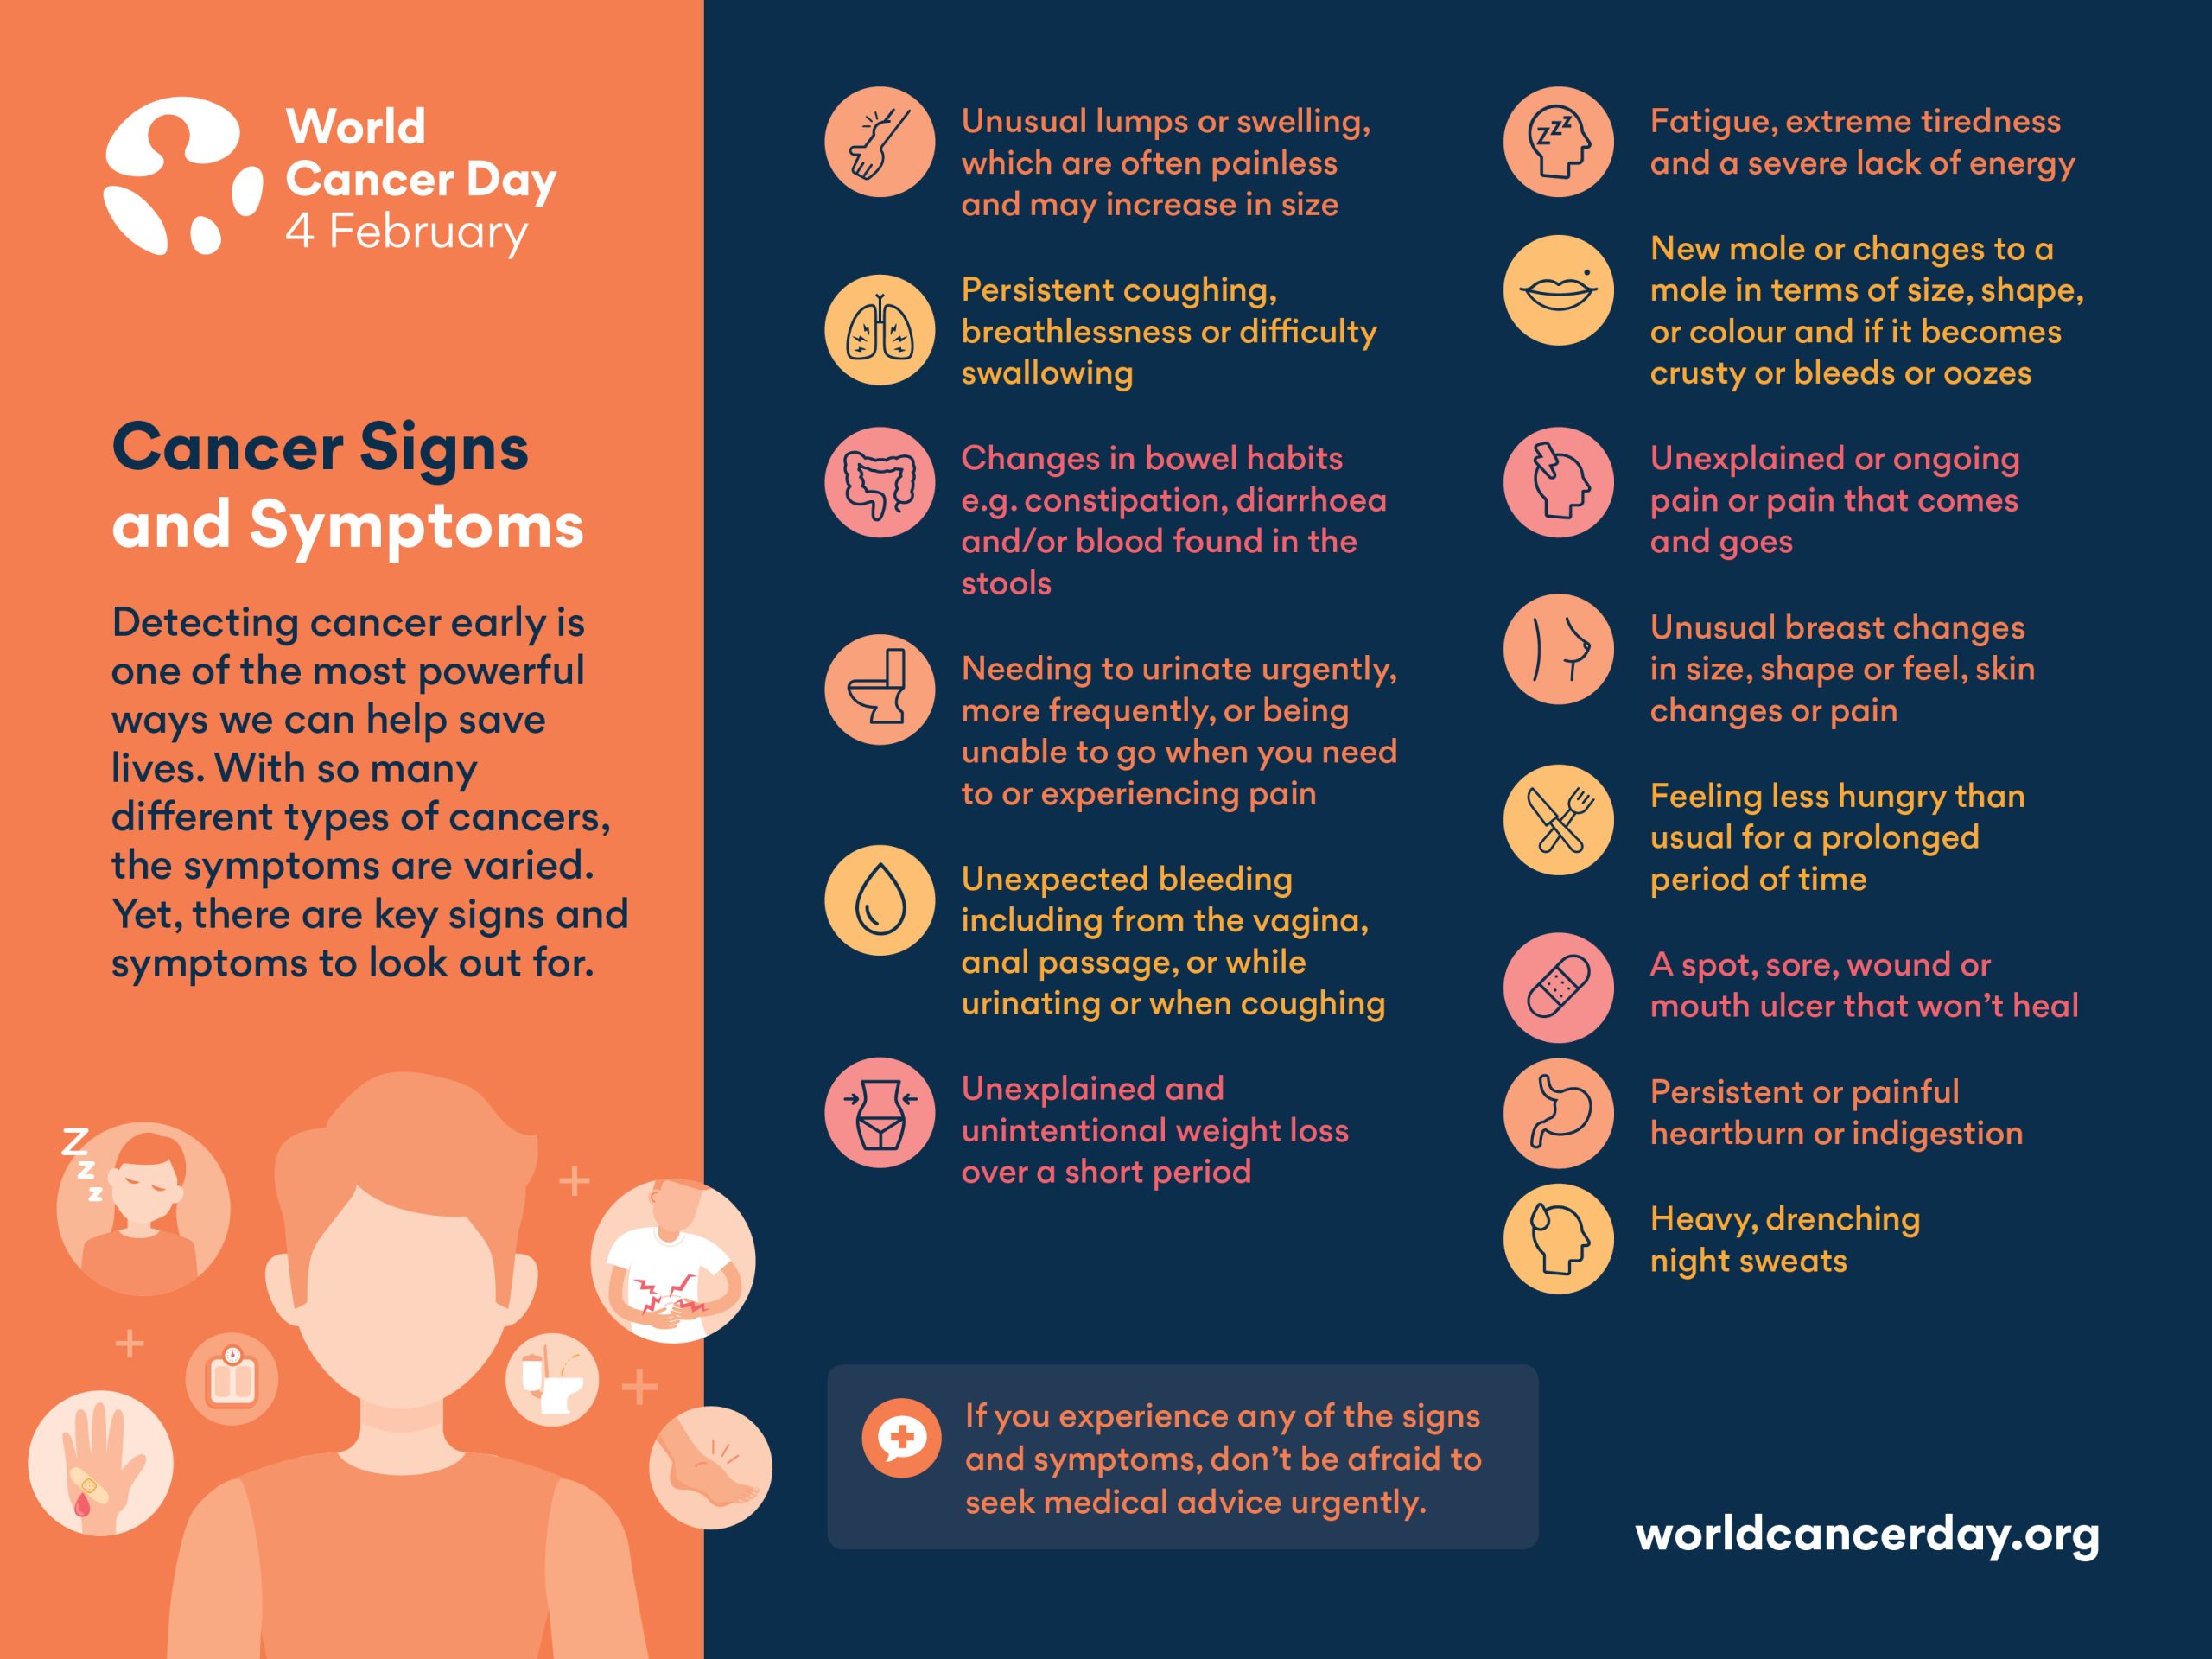 World Cancer Day - Cancer Signs and Symtoms